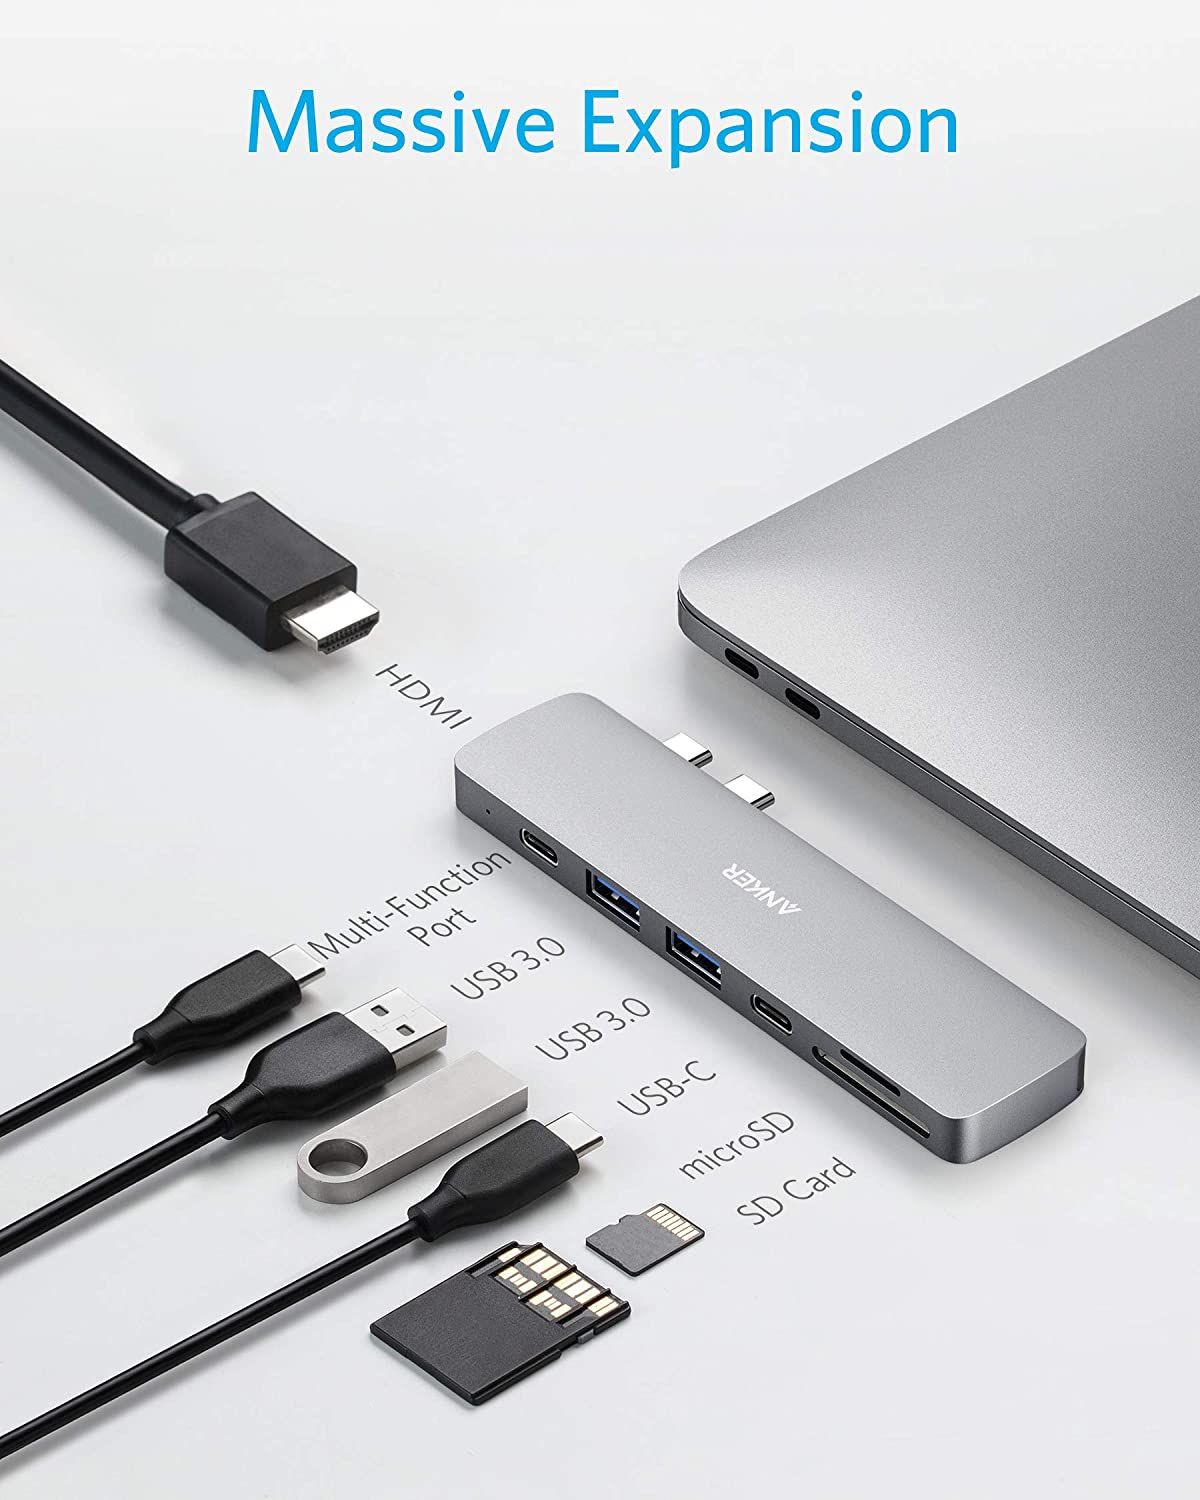 The number and type of ports on the Anker PowerExpand Direct 7-in-2 USB C Adapter.